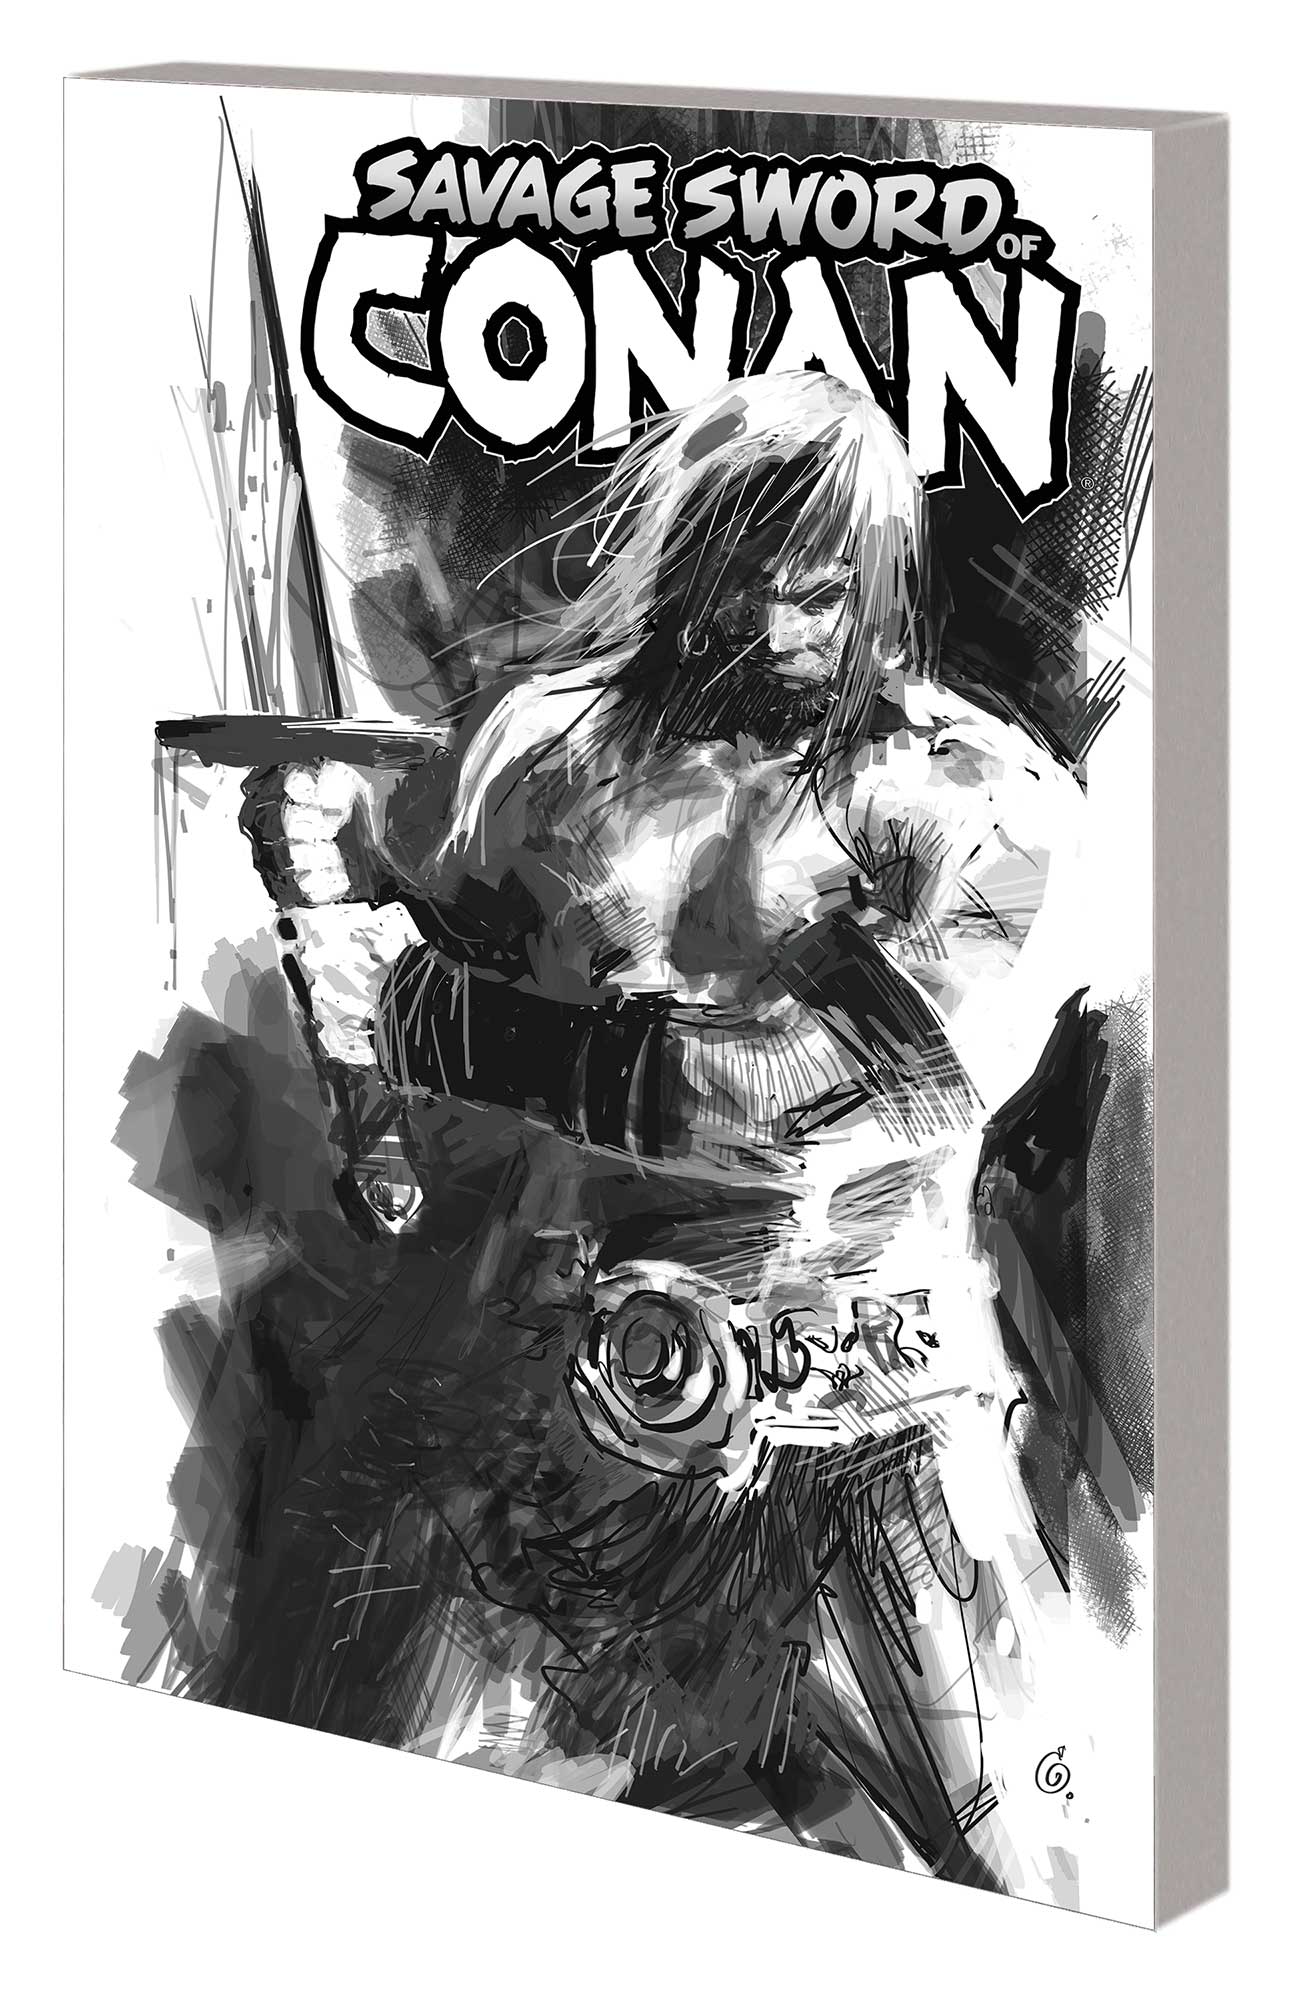 Savage Sword of Conan #1: The Cult of Koga Thun black and white TPB cover